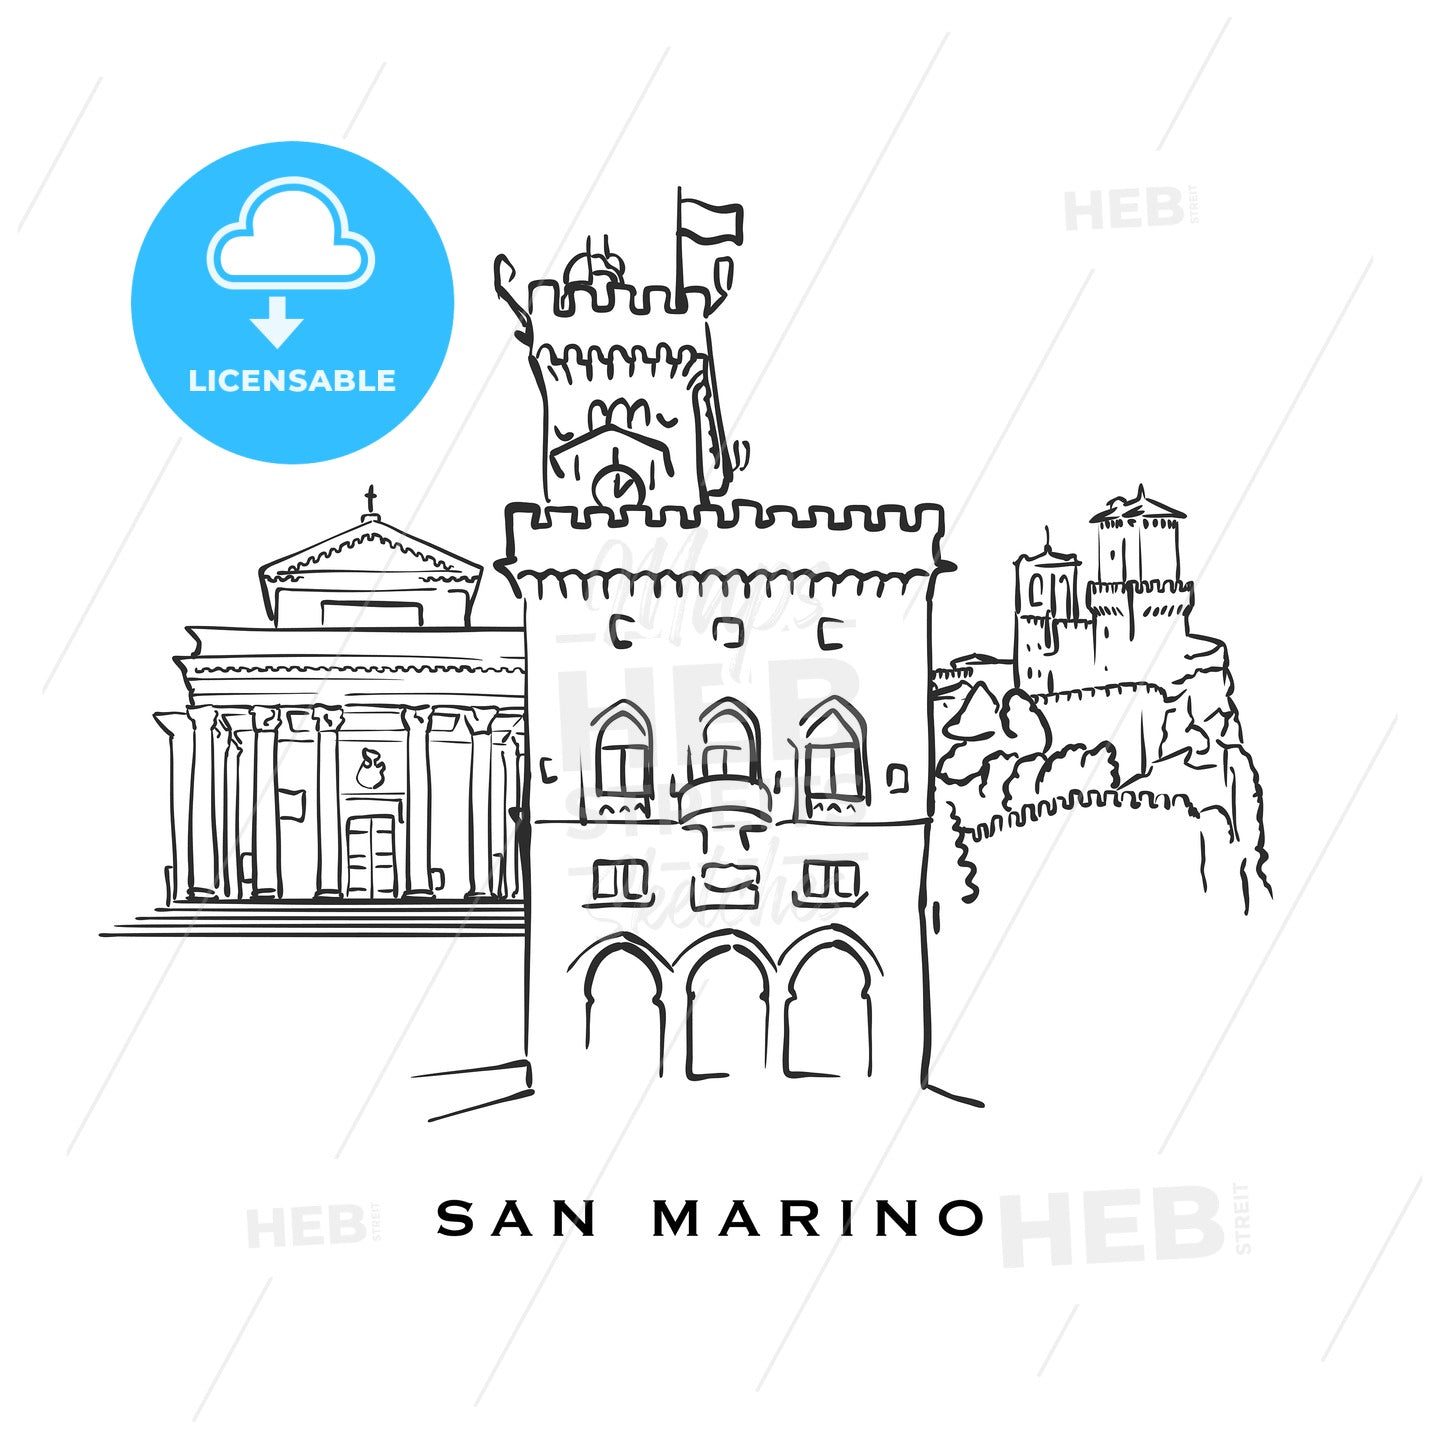 San Marino famous architecture – instant download